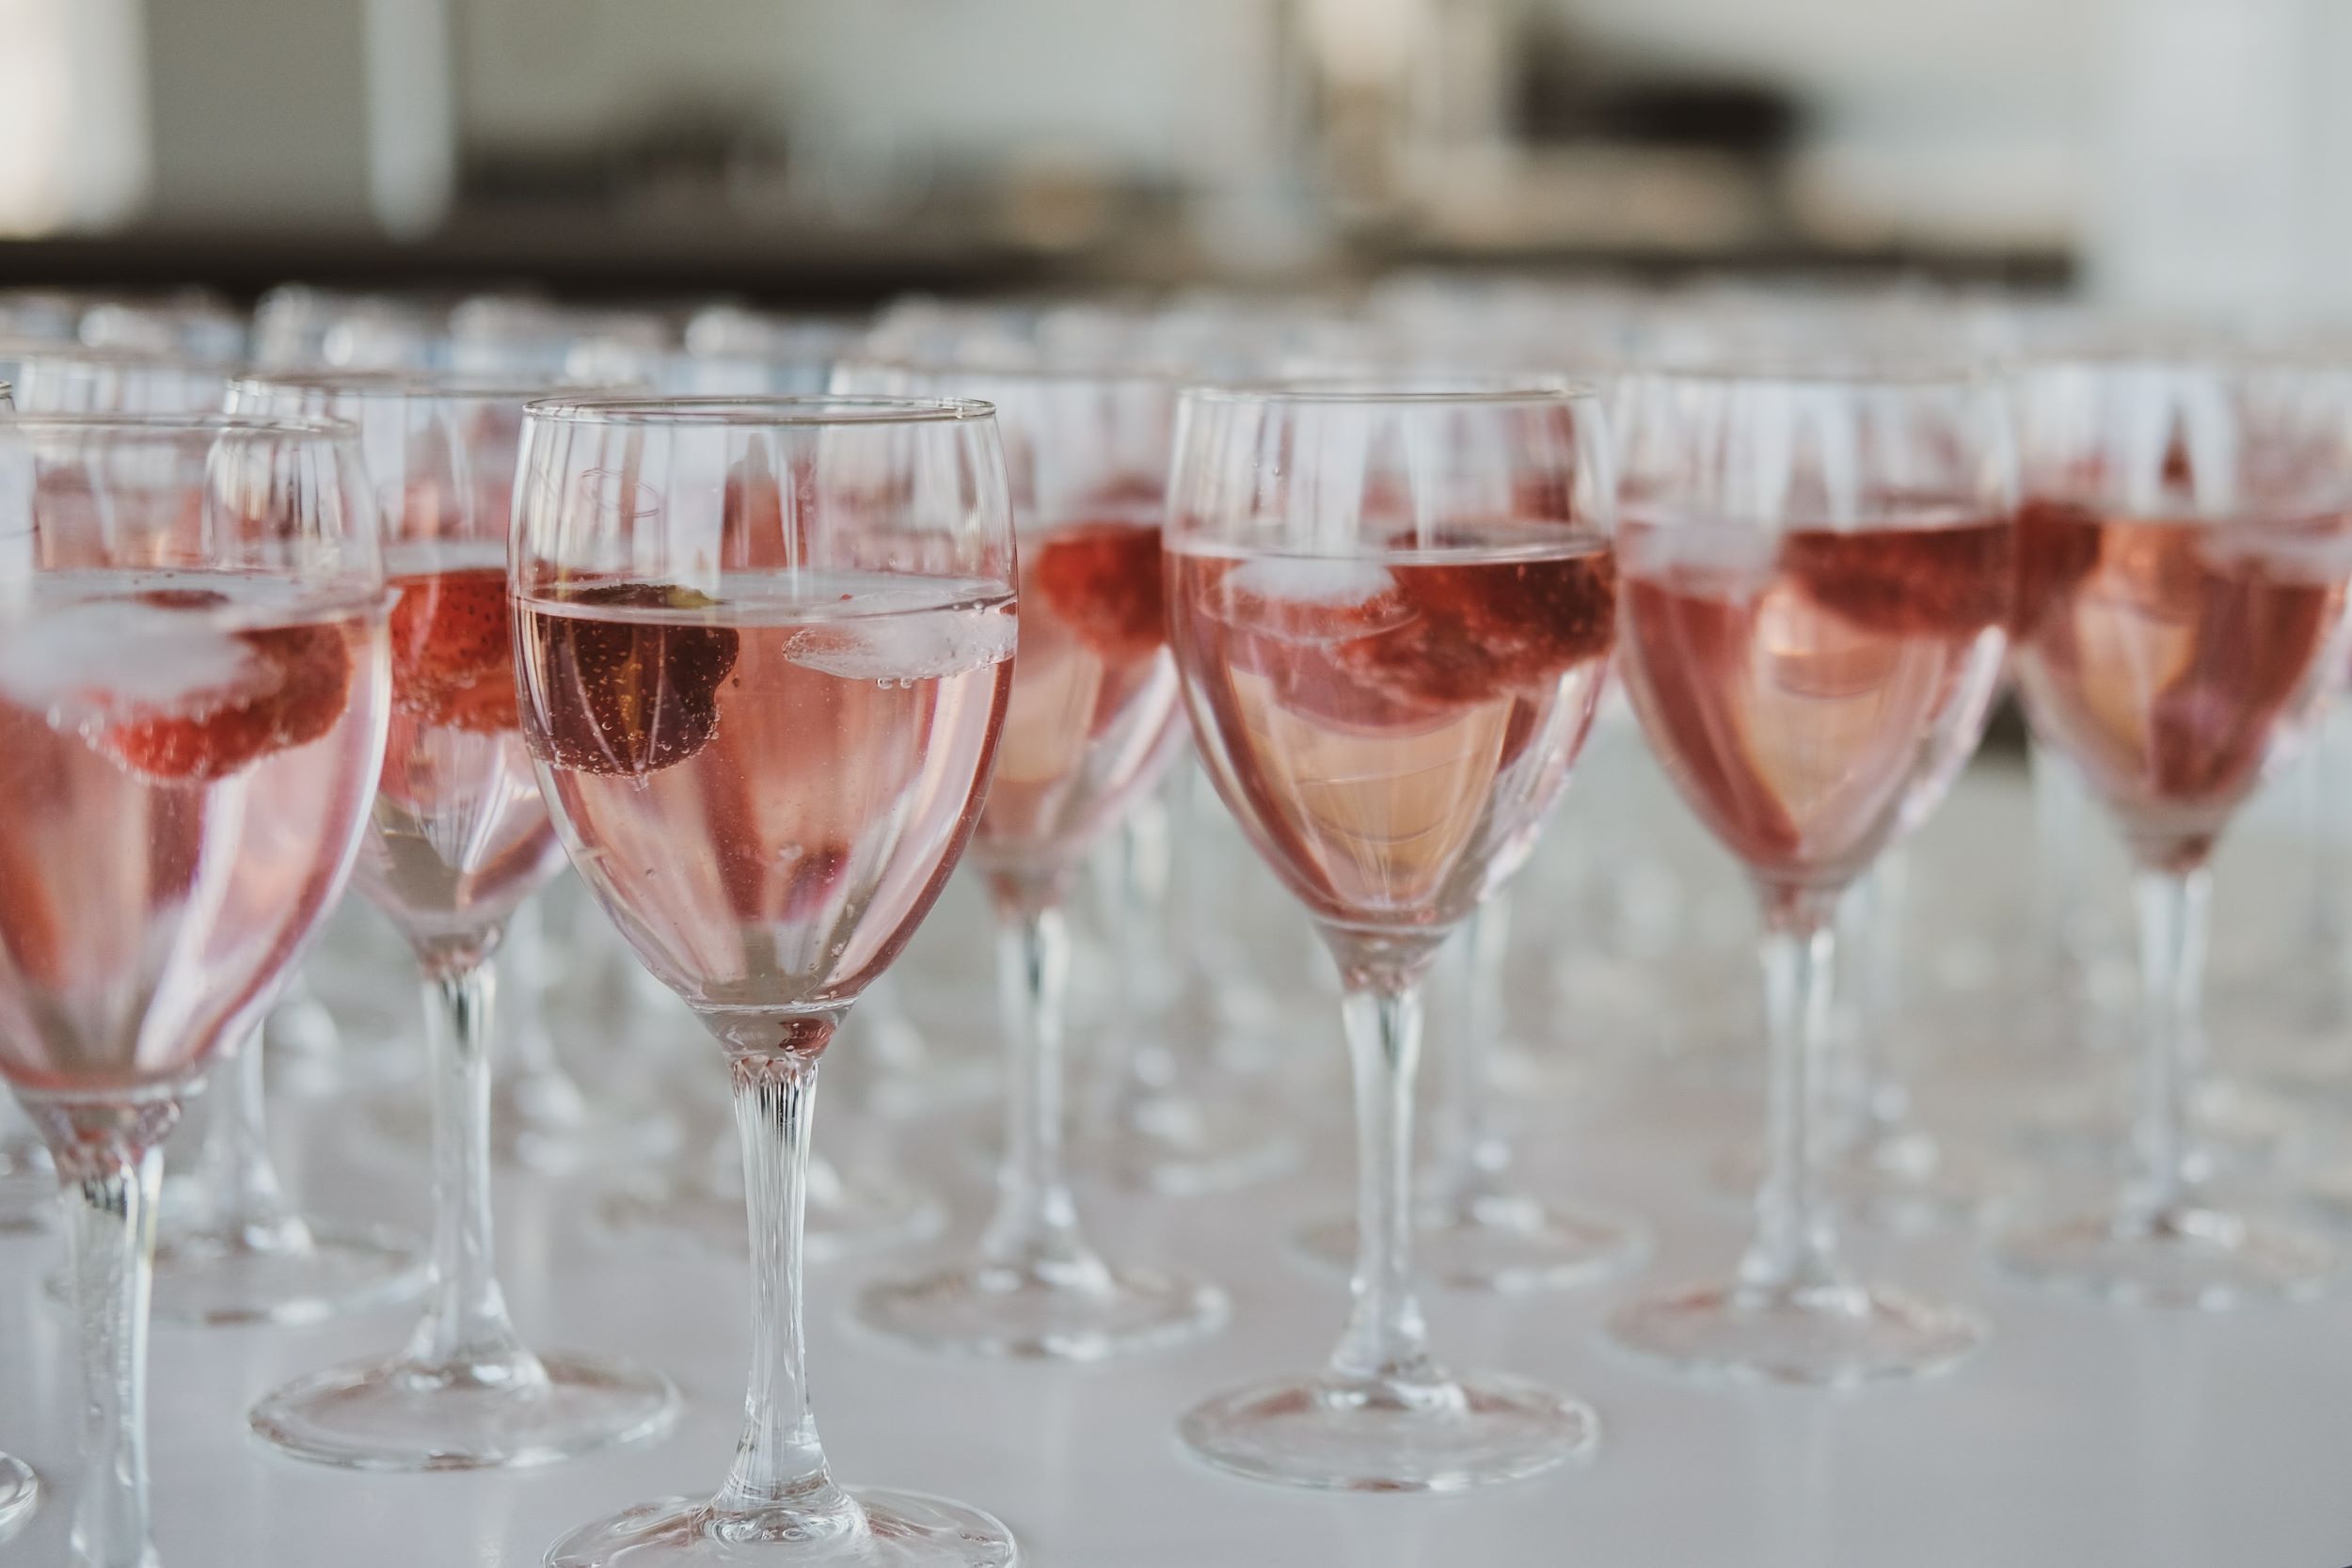 An image of numerous glasses of rosé wine.